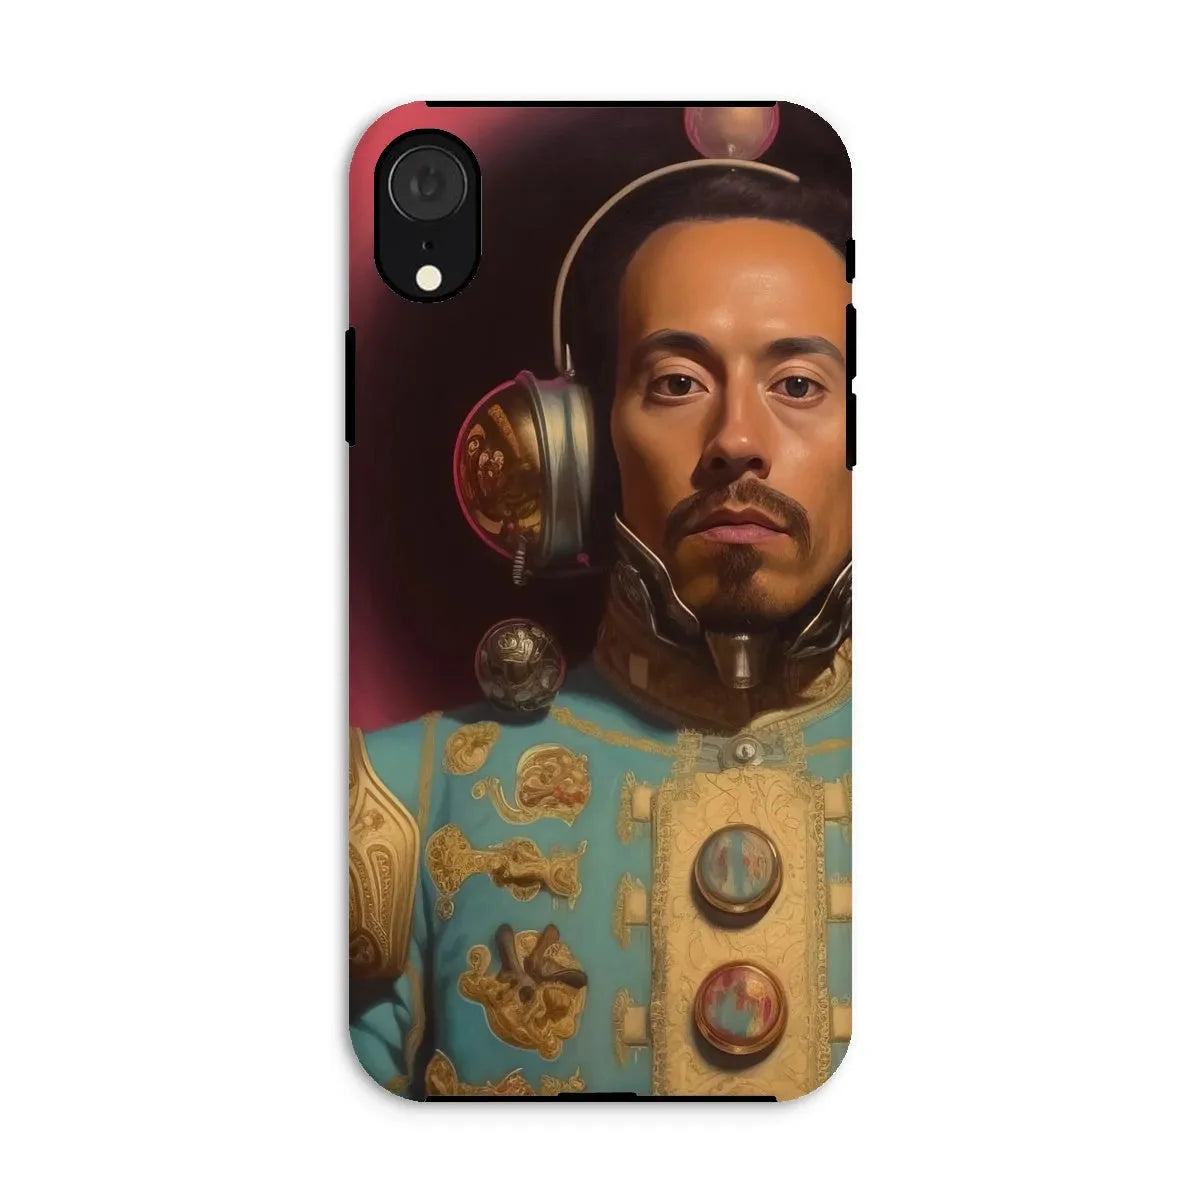 Armando The Gay Astronaut - Queercore Aesthetic Phone Case - Iphone Xr / Matte - Mobile Phone Cases - Aesthetic Art